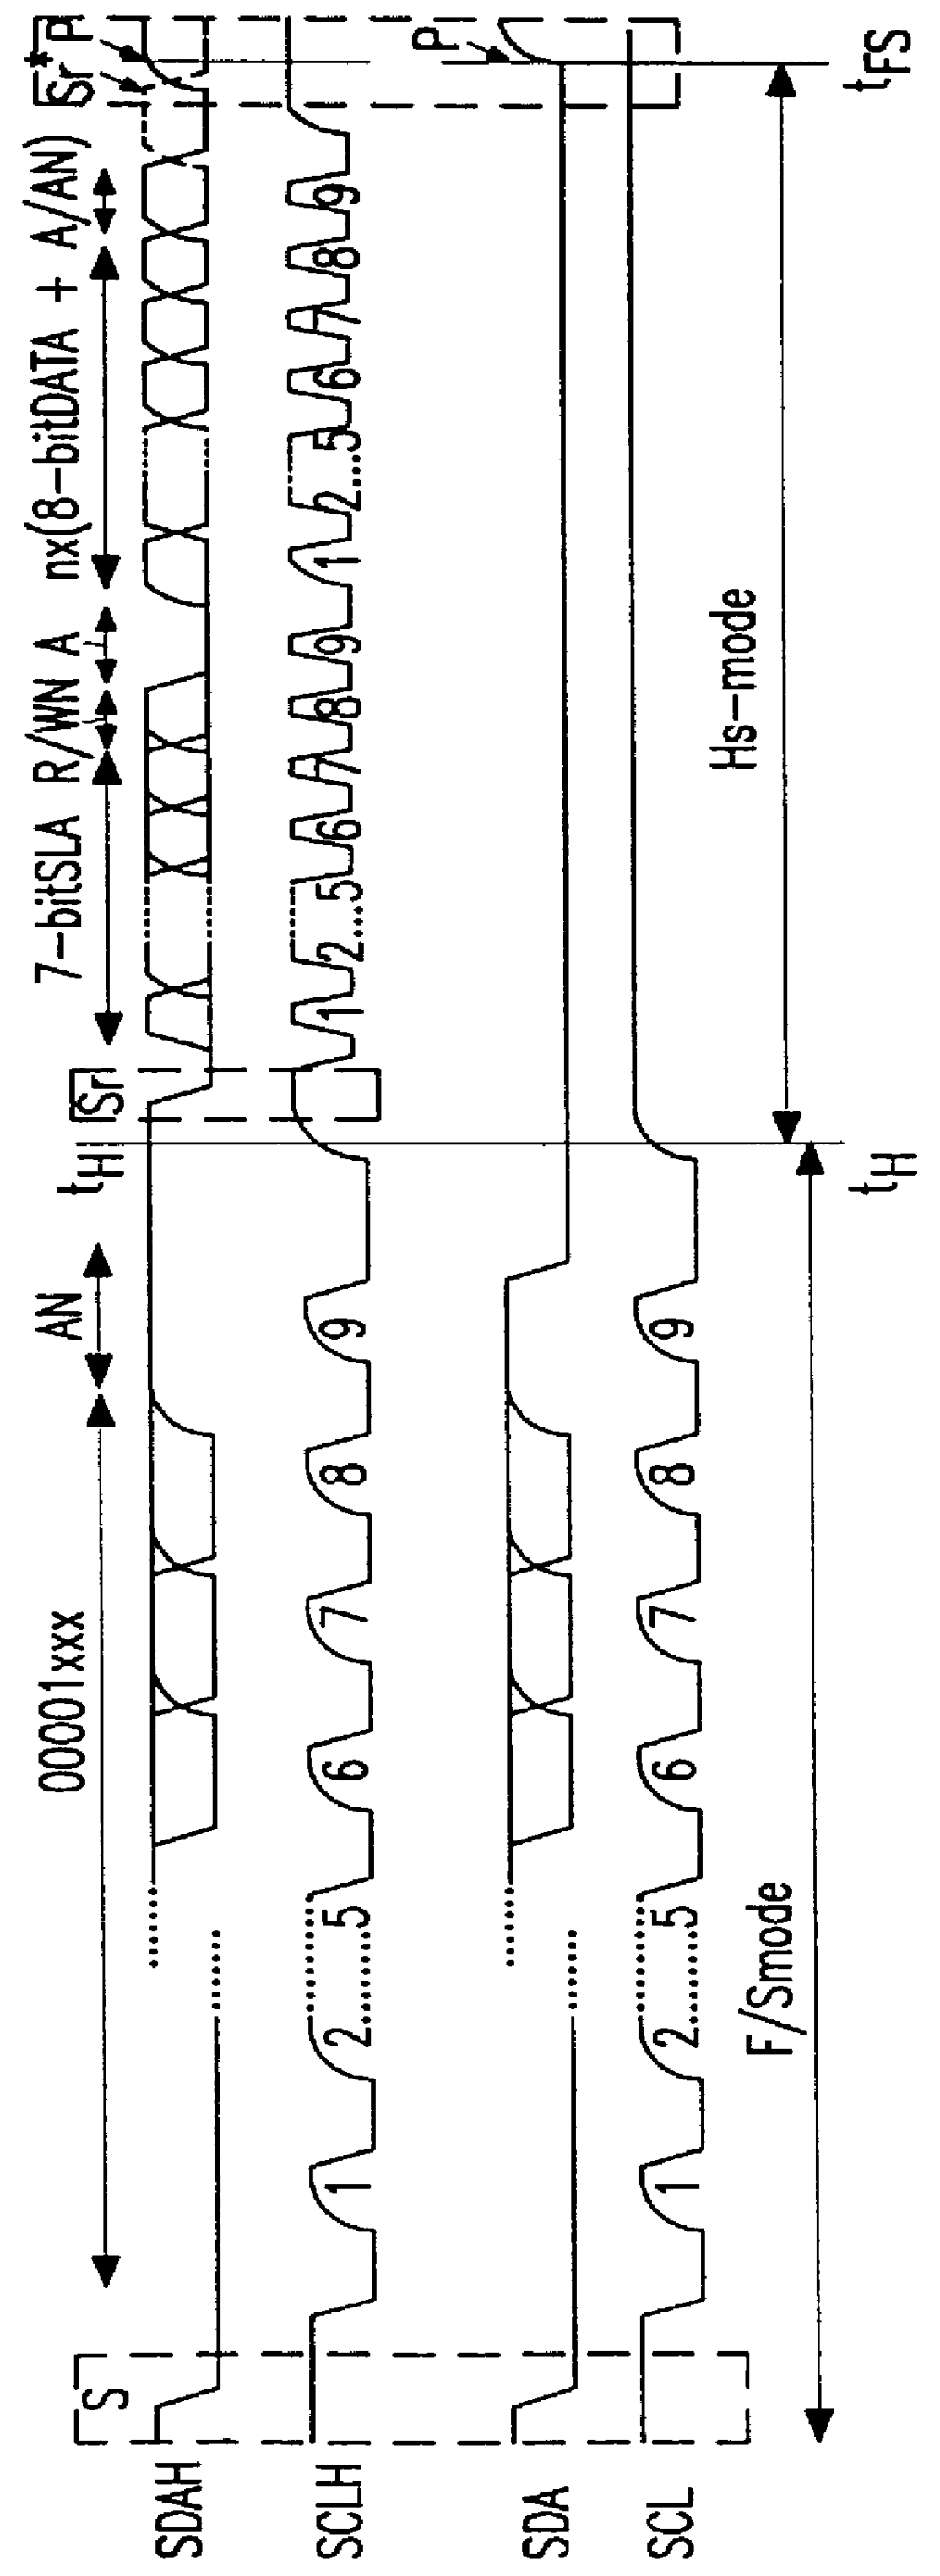 Electronic apparatus having a high-speed communication bus system such as an I.sup.2 C bus system